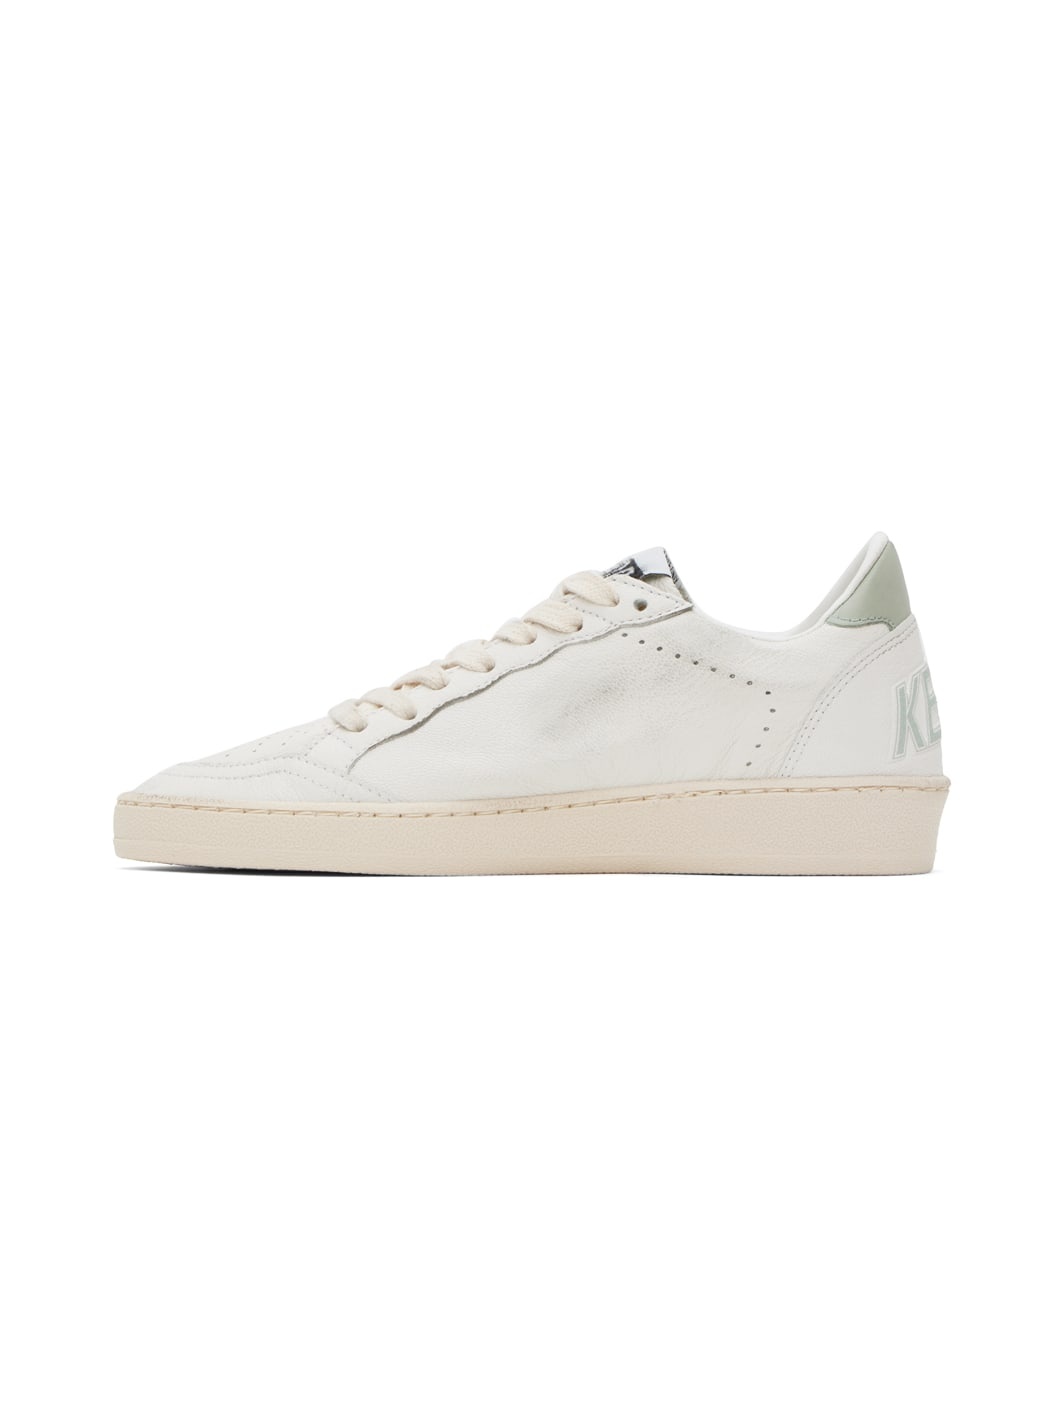 SSENSE Exclusive White & Green Ball Star Sneakers - 3